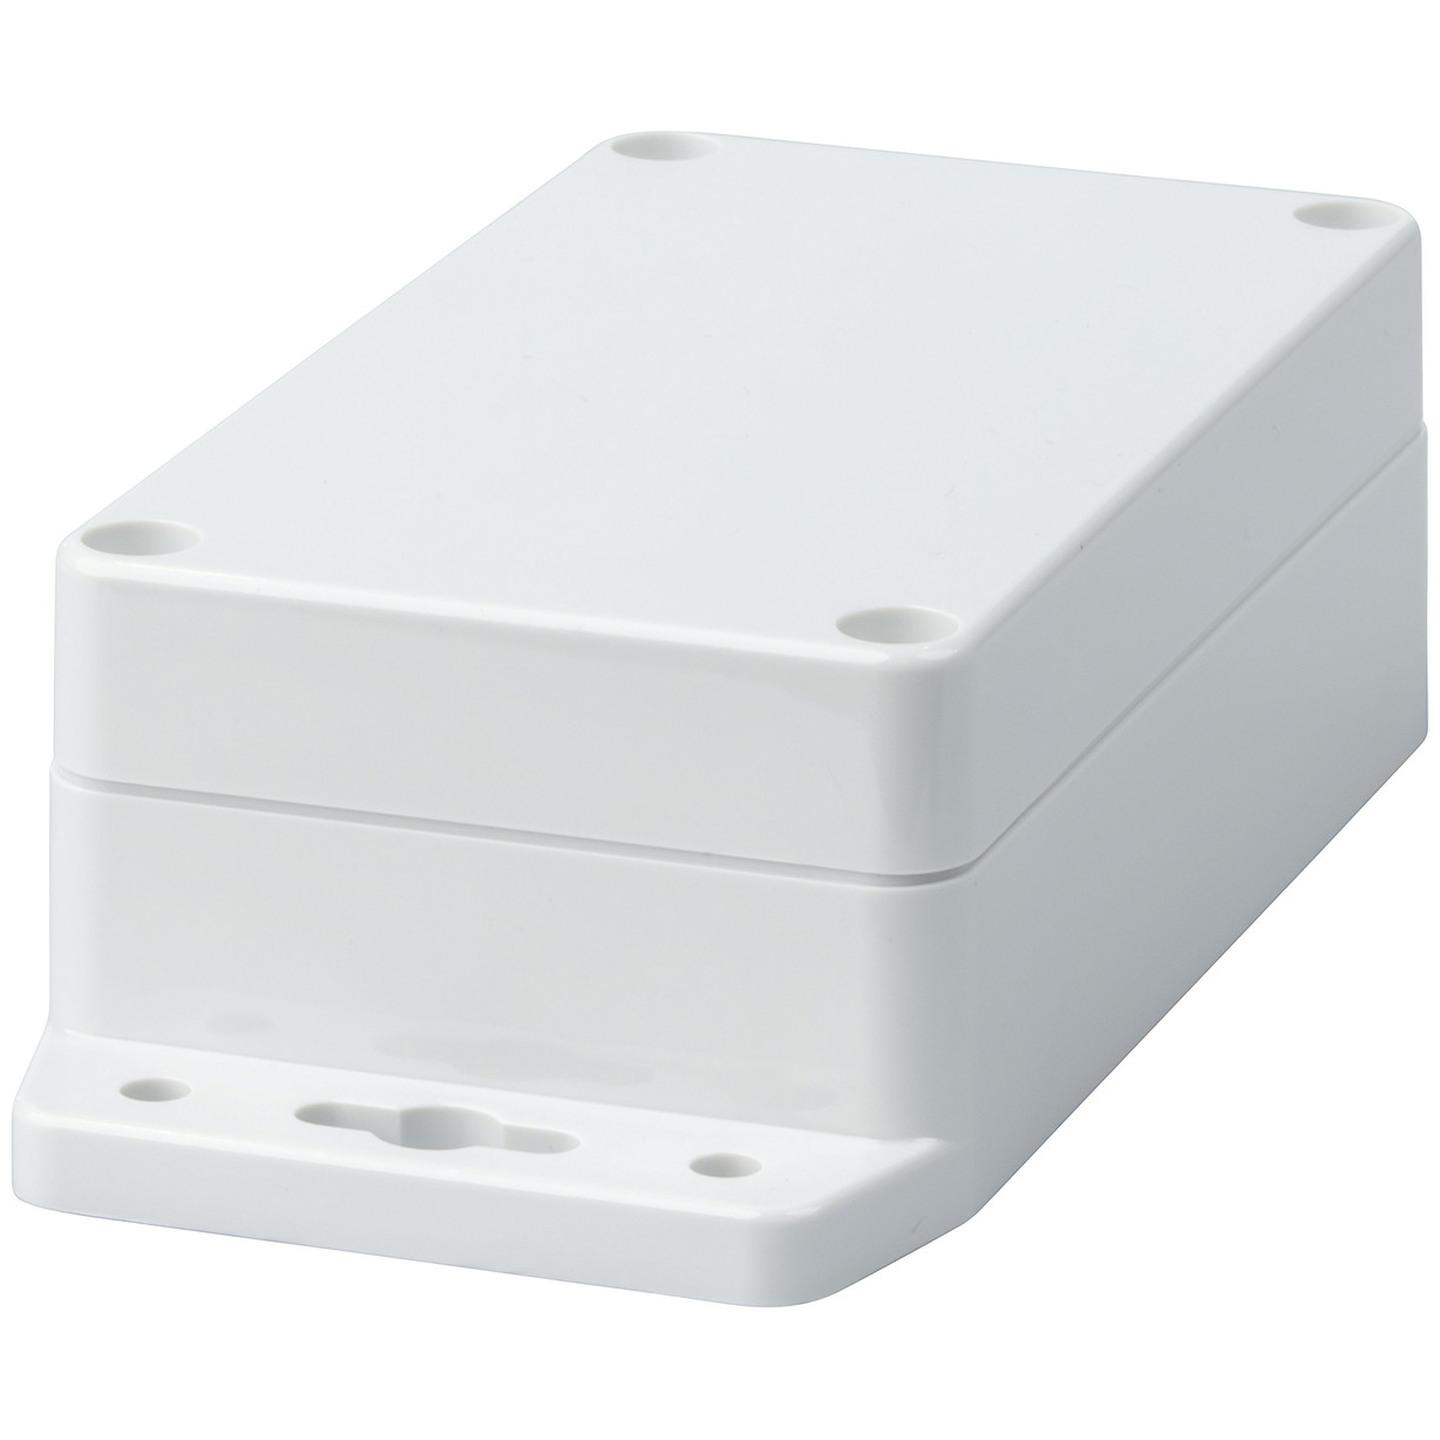 IP65 Sealed Polycarbonate Enclosures - Light Grey with Mounting Flange - 115W x 65D x 40Hmm